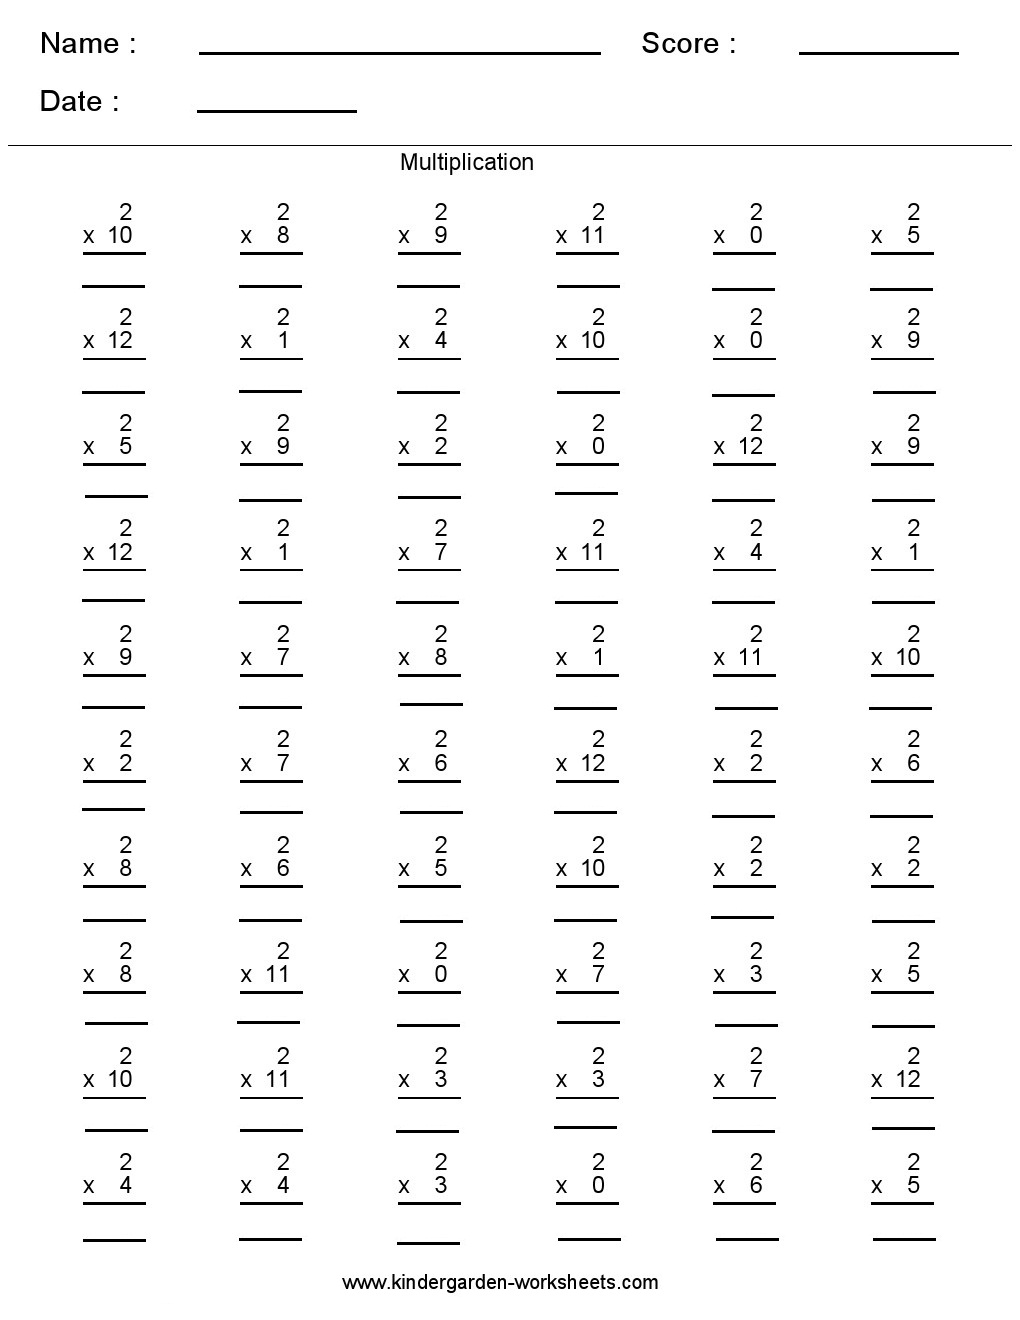 4-best-images-of-5th-grade-math-worksheets-multiplication-printable-5th-5th-grade-math